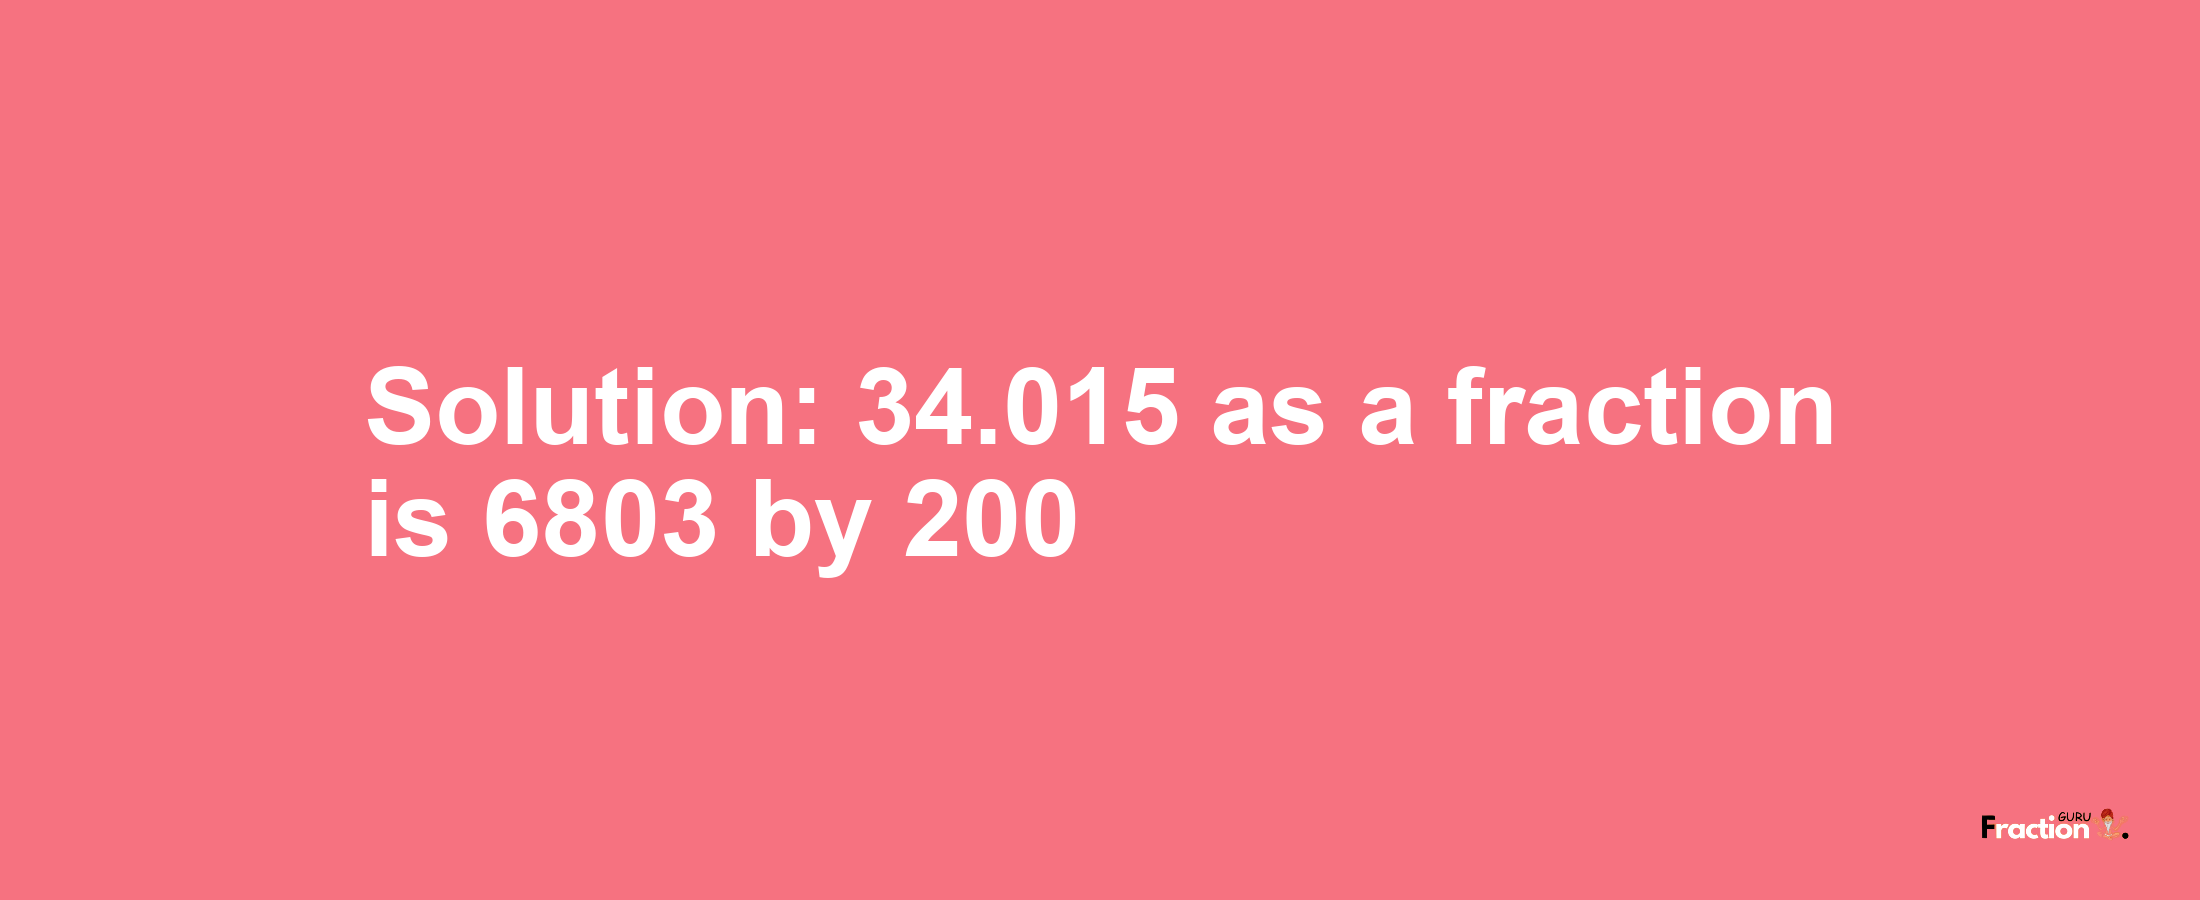 Solution:34.015 as a fraction is 6803/200